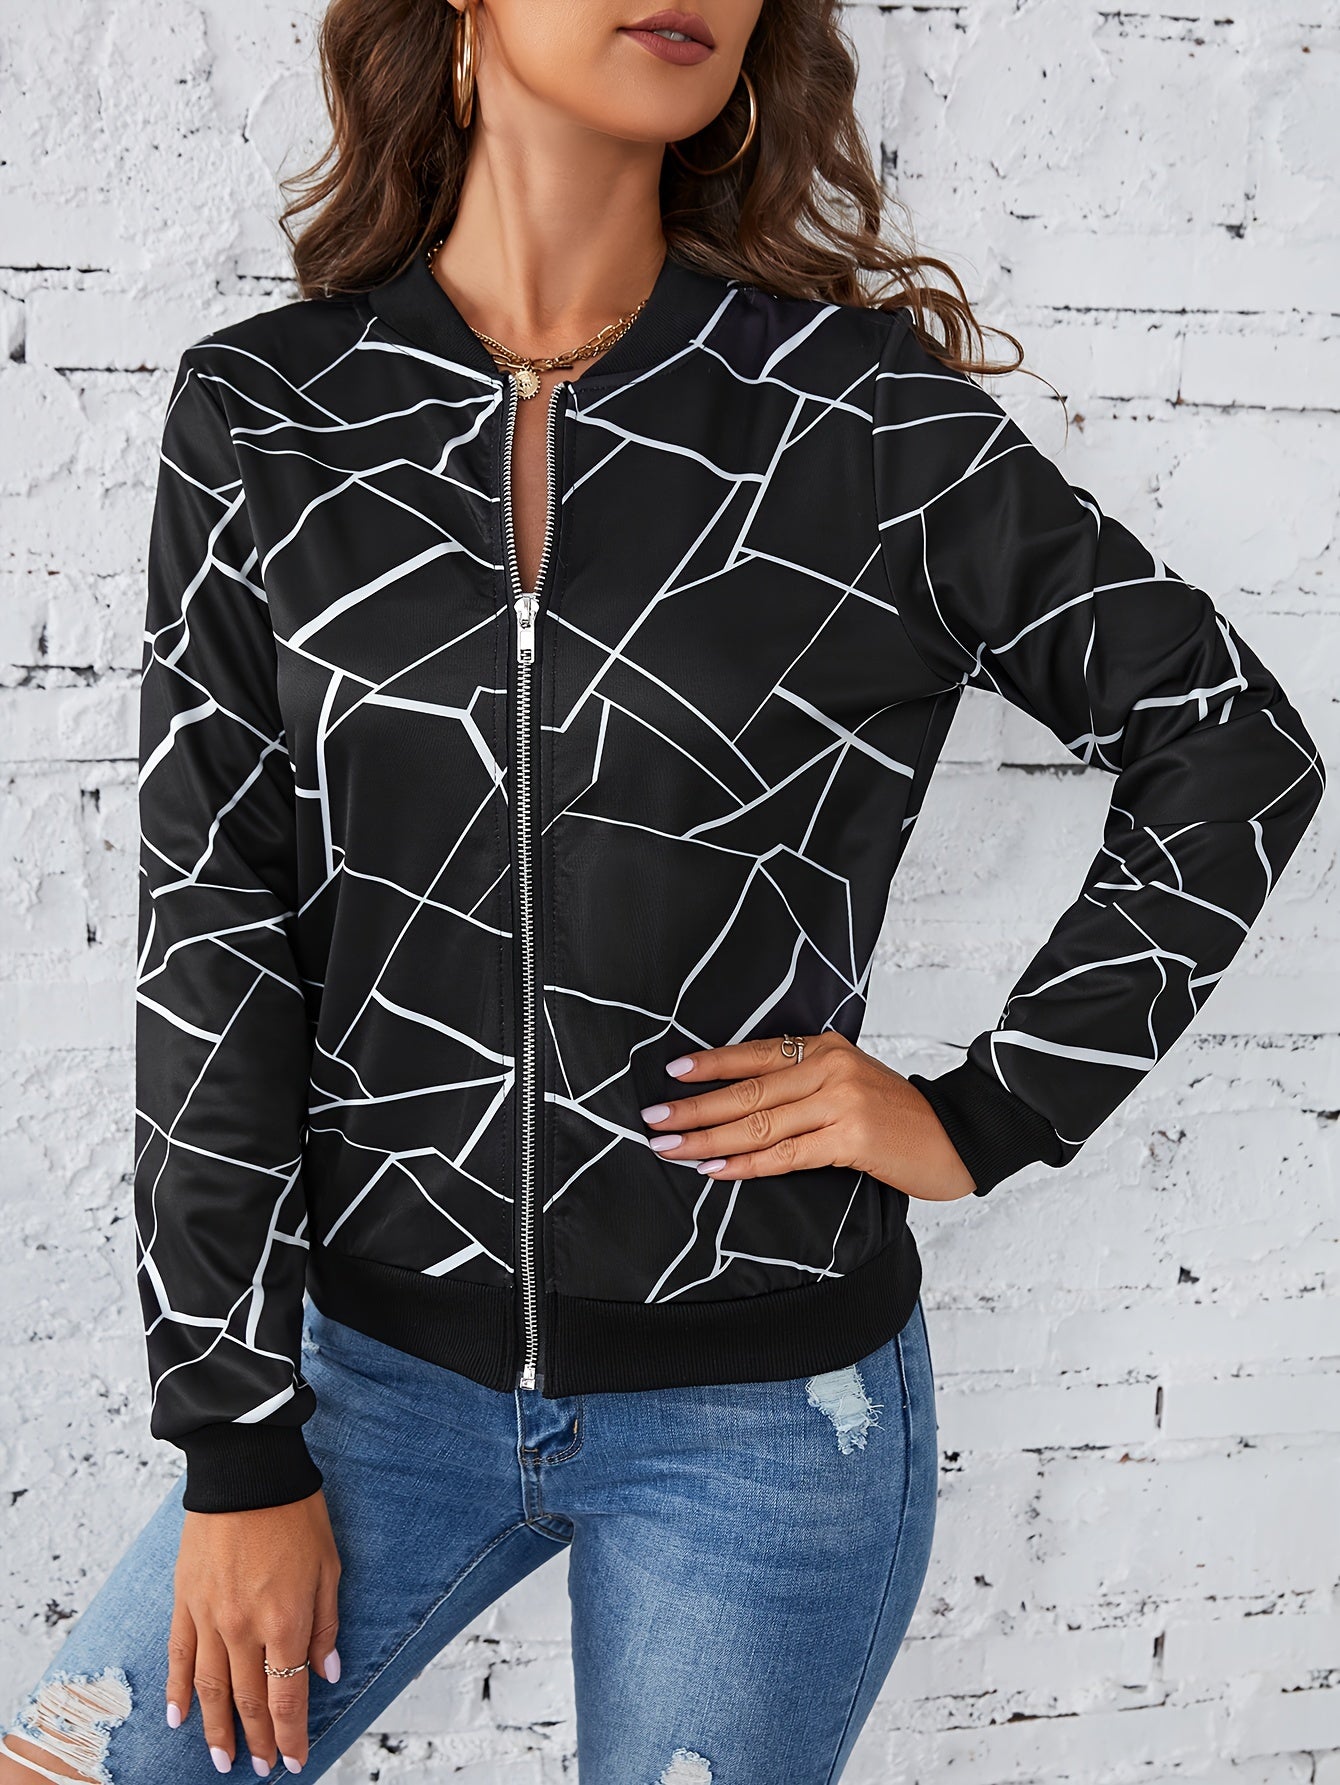 Antmvs Geo Print Zipper Front Jacket, Casual Long Sleeve Jacket For Spring & Fall, Women's Clothing